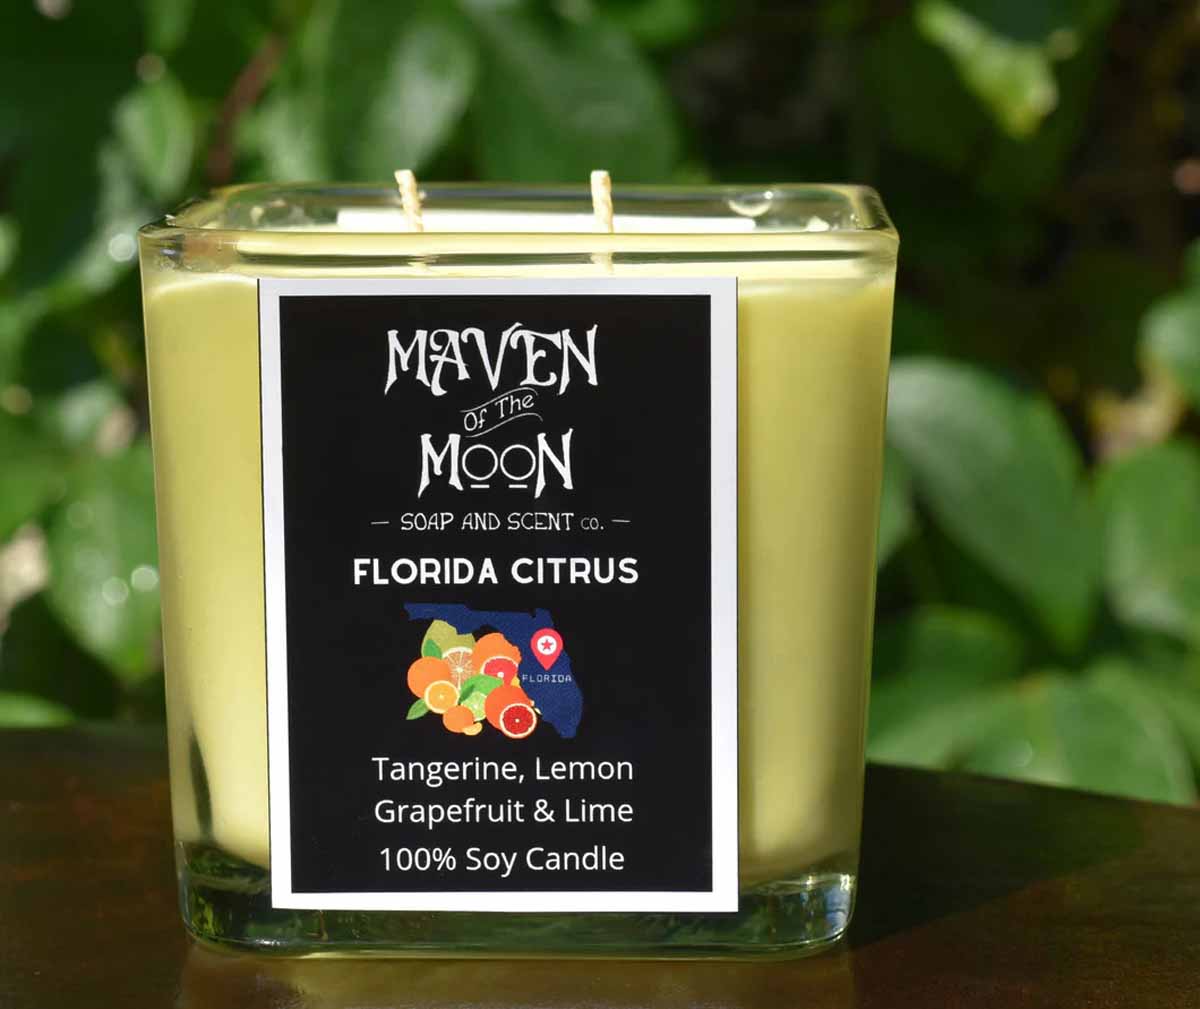 Citrus-scented candle in Florida